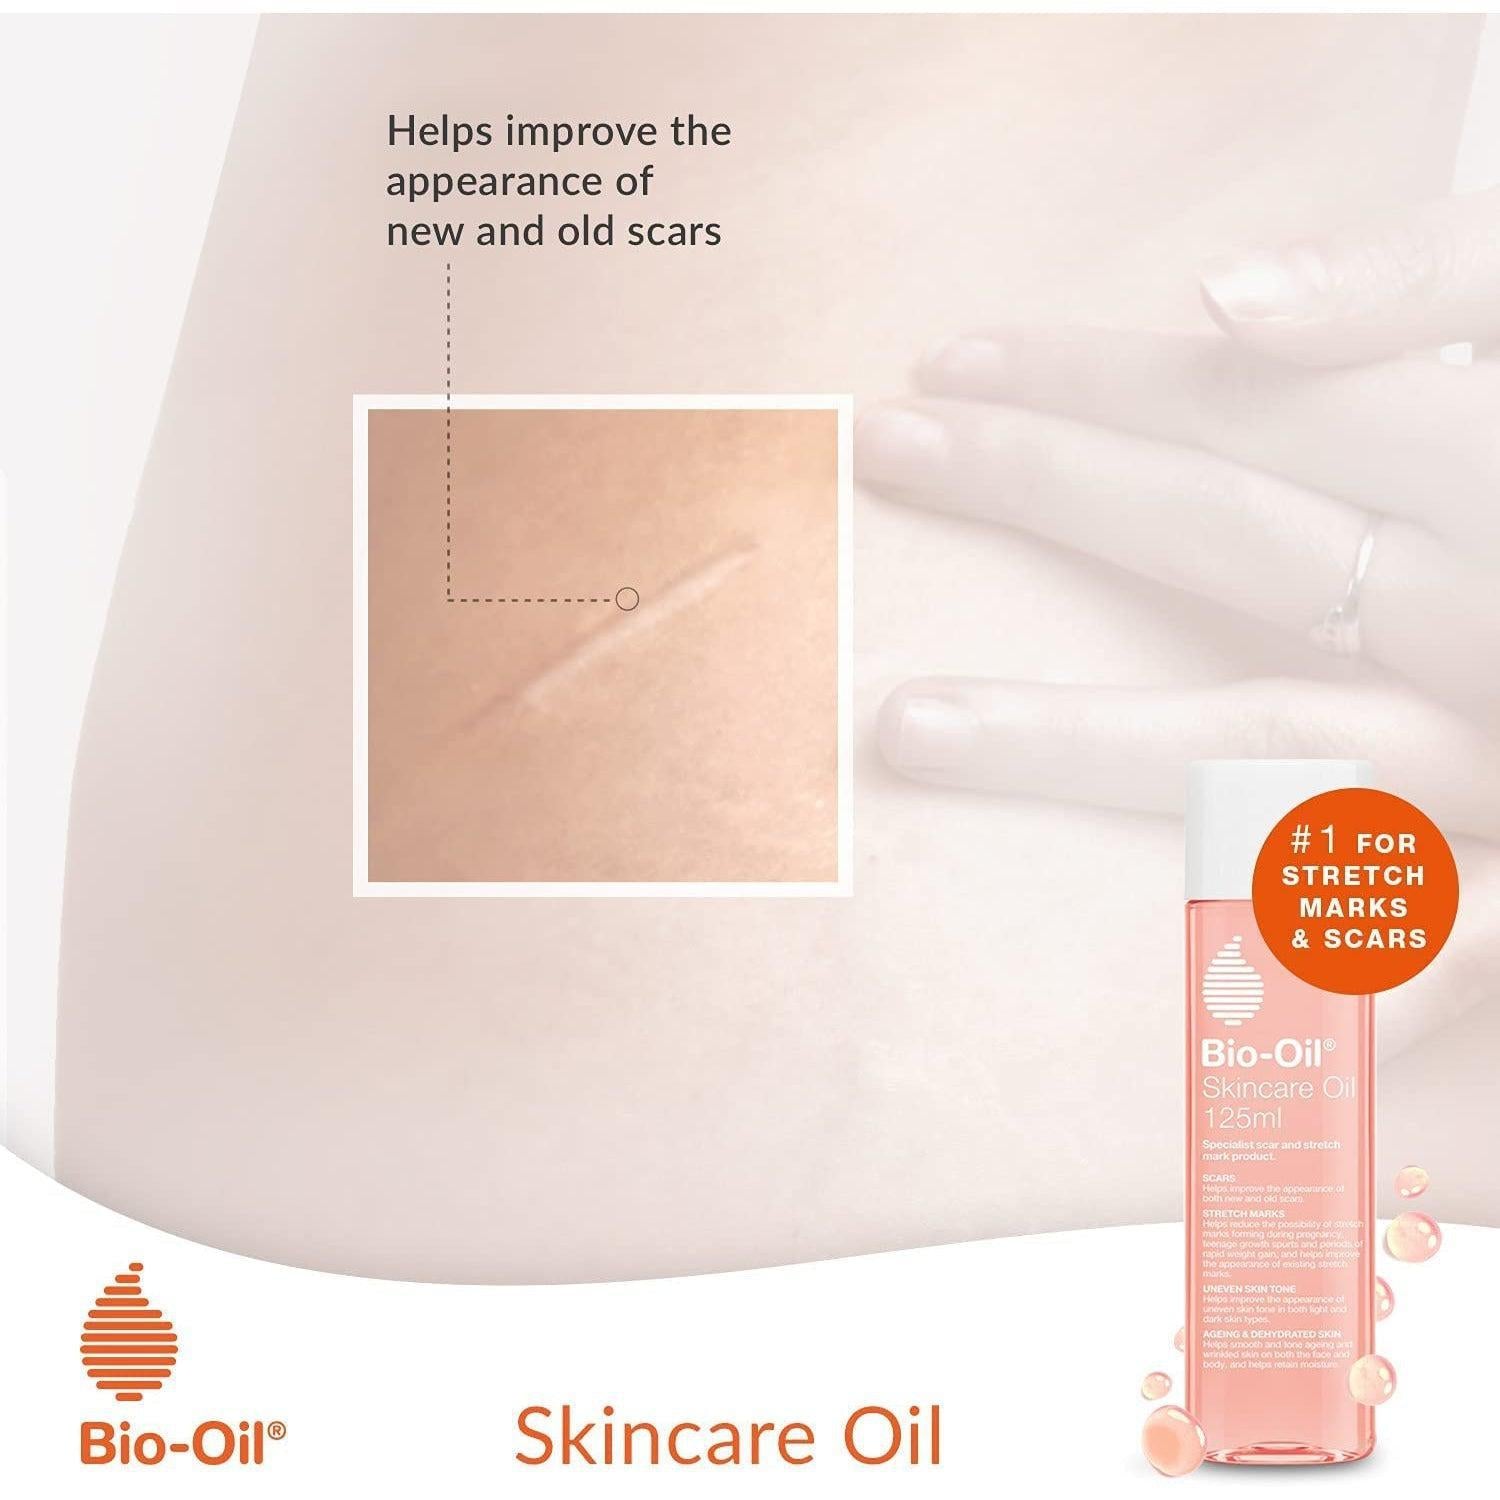 Bio-Oil Skincare Oil - Improve the Appearance of Scars, Stretch Marks and Skin Tone ,60ml - Healthxpress.ie